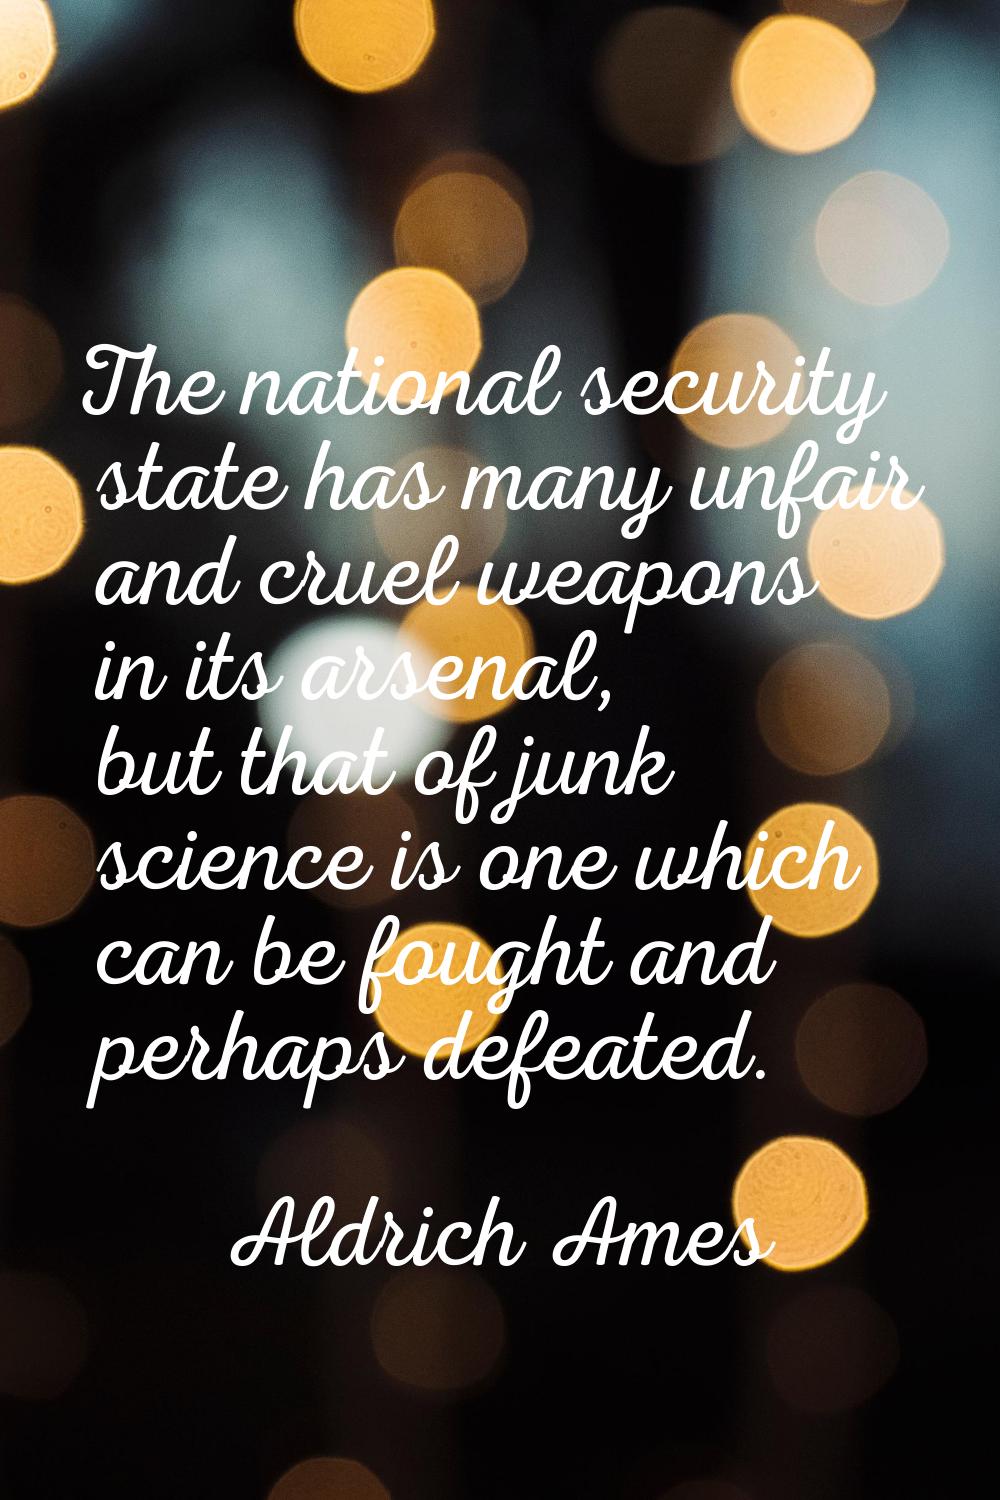 The national security state has many unfair and cruel weapons in its arsenal, but that of junk scie